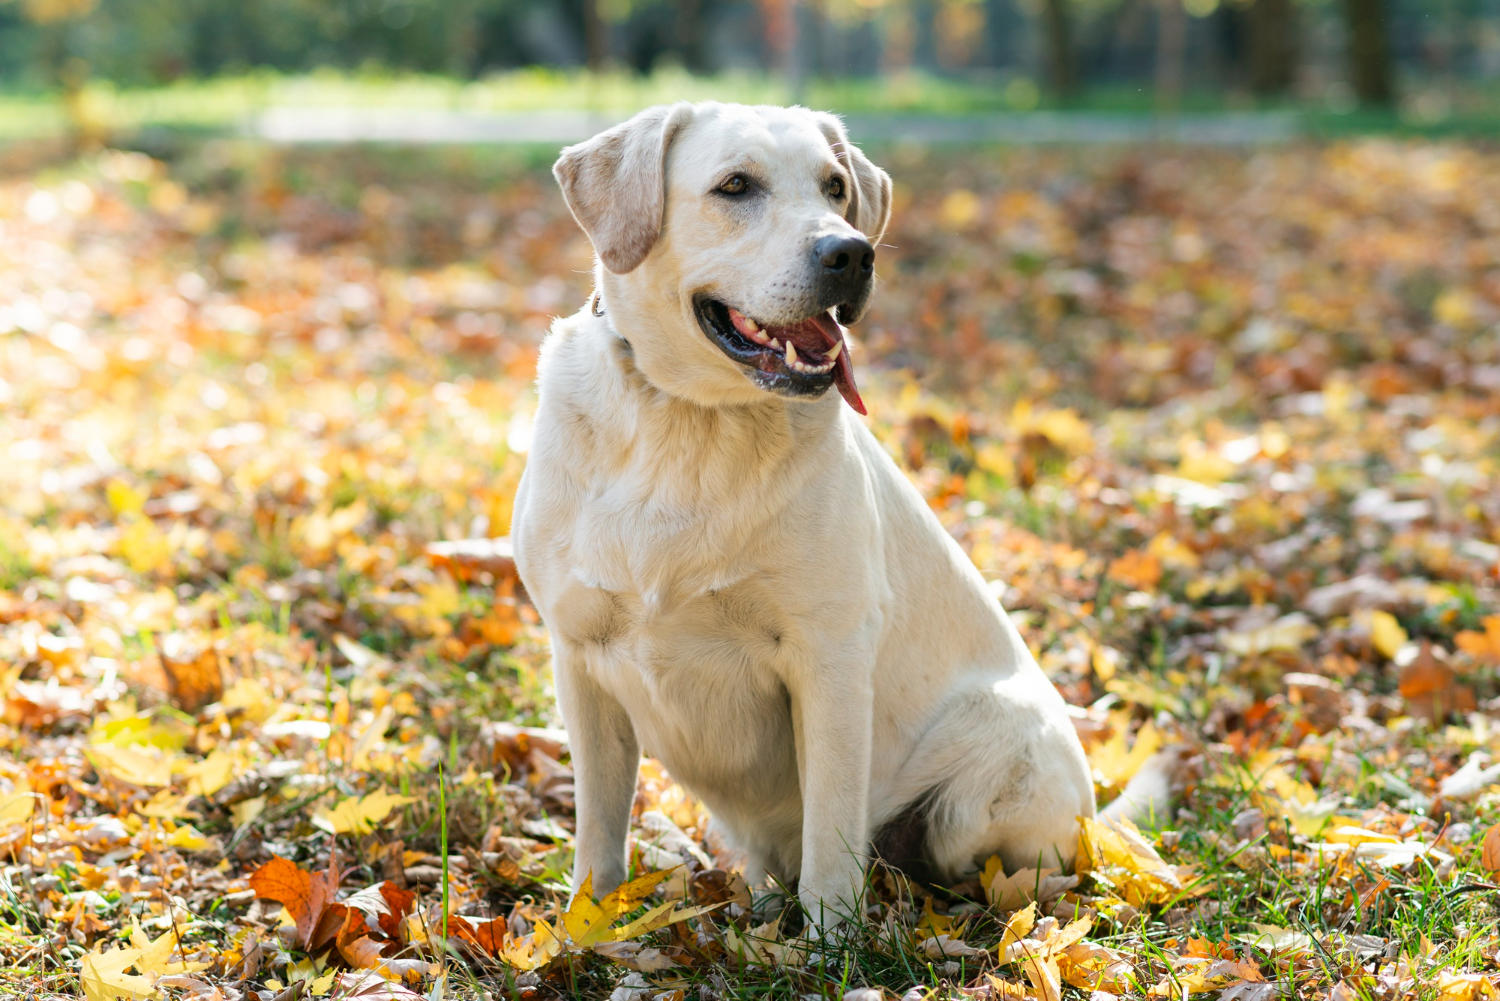 Is a Golden Retriever a Labrador? | A Comprehensive Guide to the Differences and Similarities